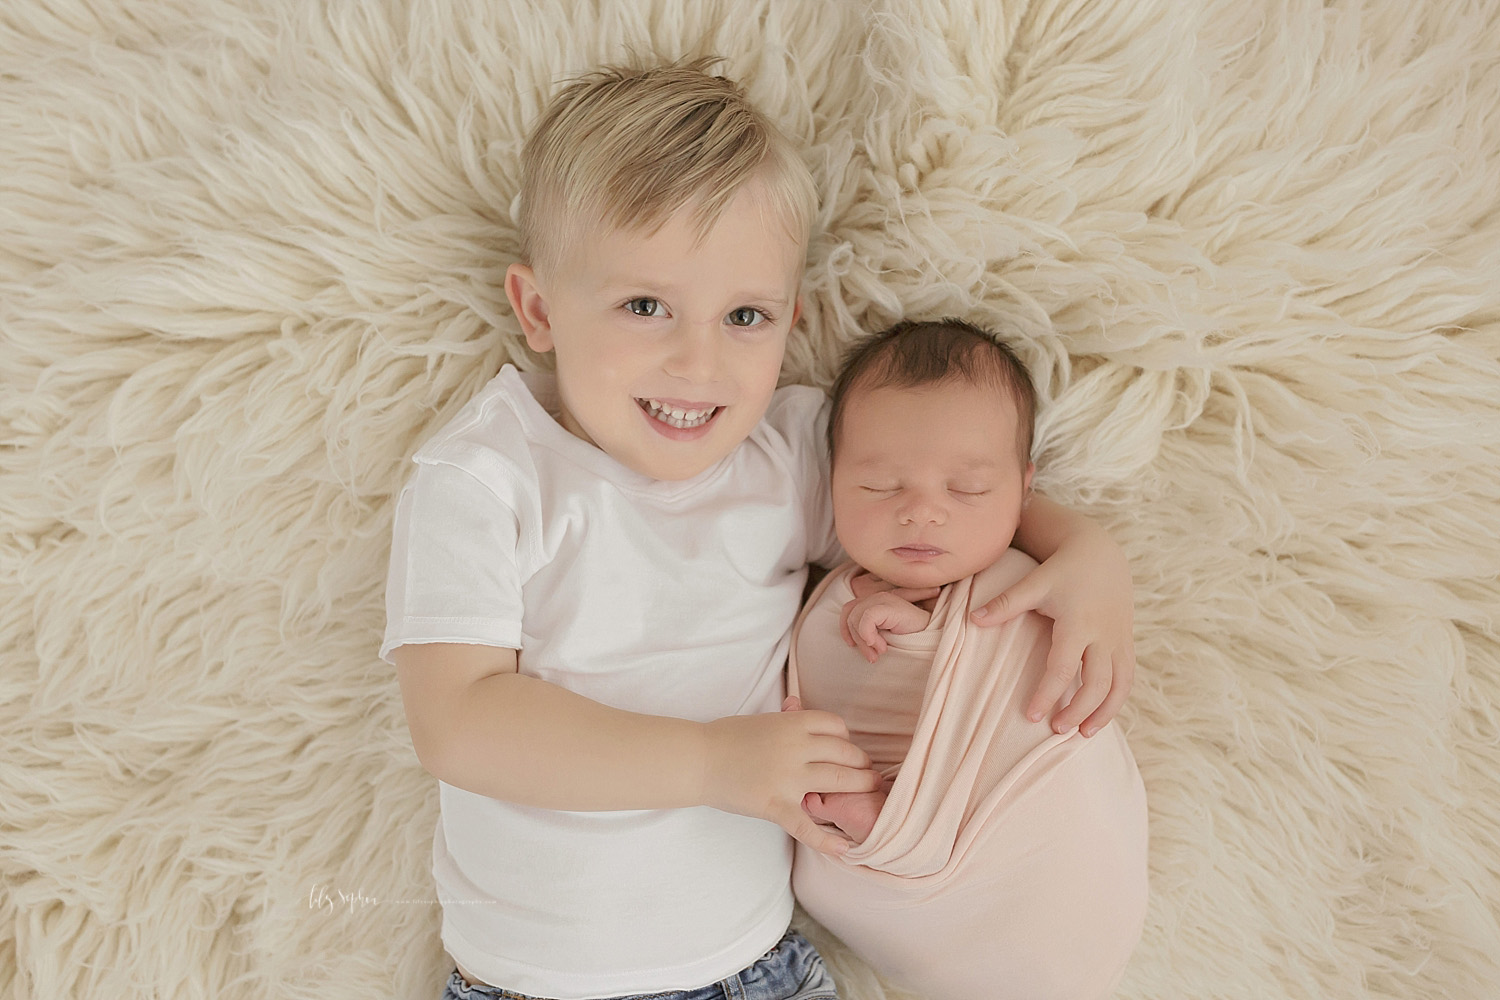  Image of a toddler boy wearing a white tee-shirt, smiling, laying beside his sleeping, baby, sister with his arm around her.&nbsp; 